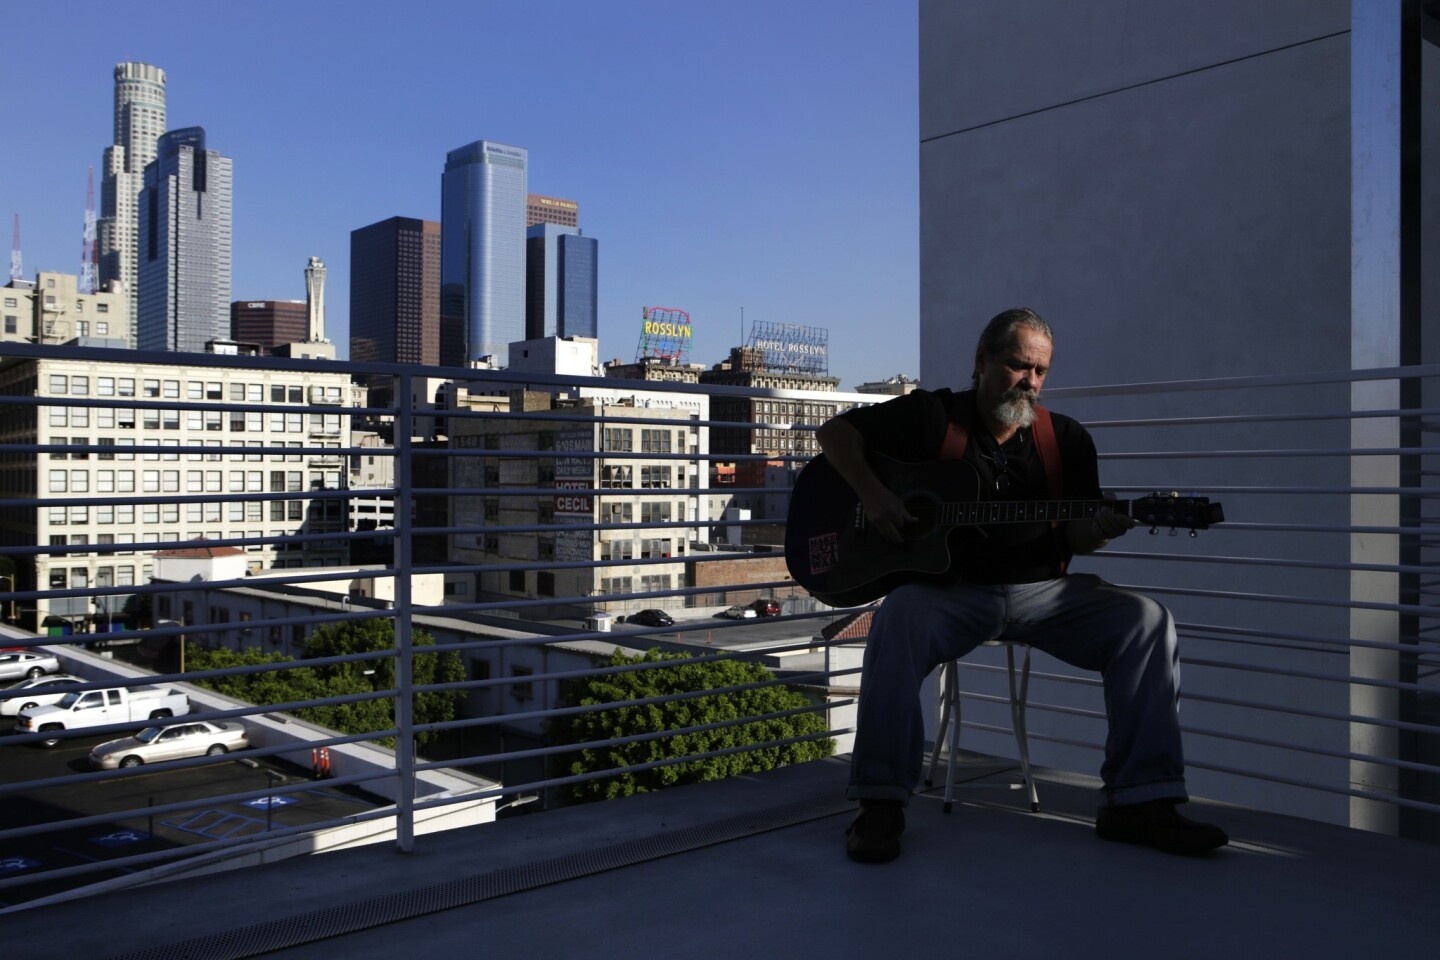 Bill Fisher, 61, has a view of the downtown L.A. skyline from outside his apartment in a new complex at 6th Street and Maple Avenue in skid row.